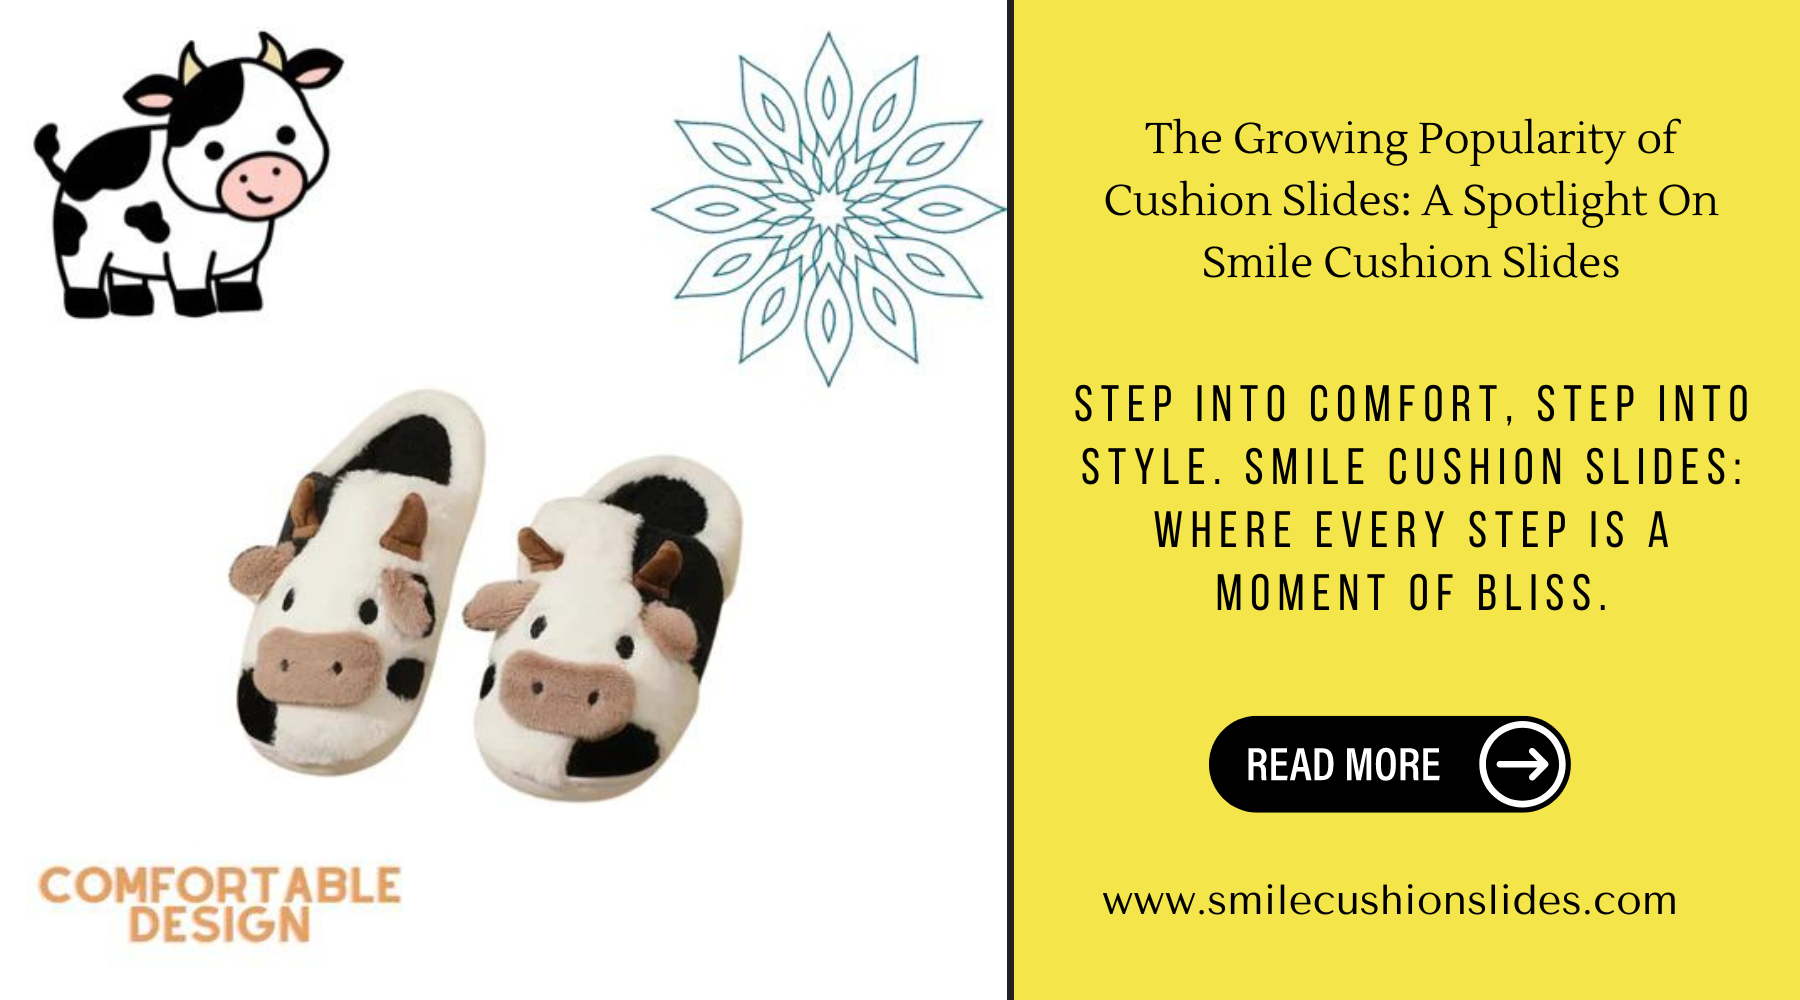 The Growing Popularity of Cushion Slides: A Spotlight On Smile Cushion Slides